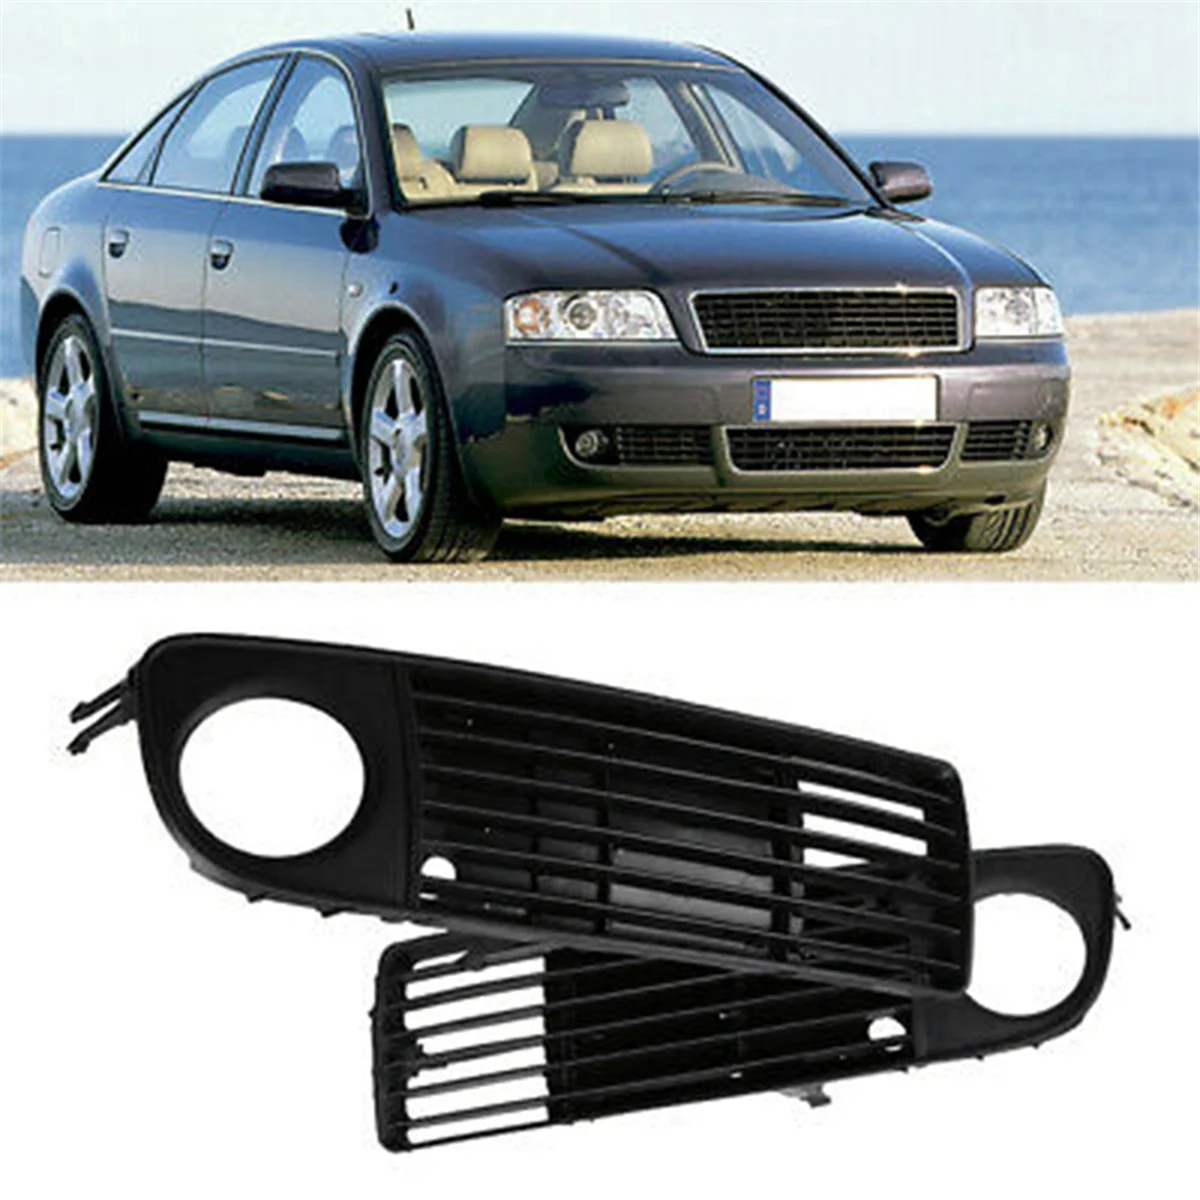 

Automobile Front Bumper Fog Lamp Grille Fog Lamp Frame Cover for Audi A6 C5 1998-2001 4B0807682S 4B0807681S